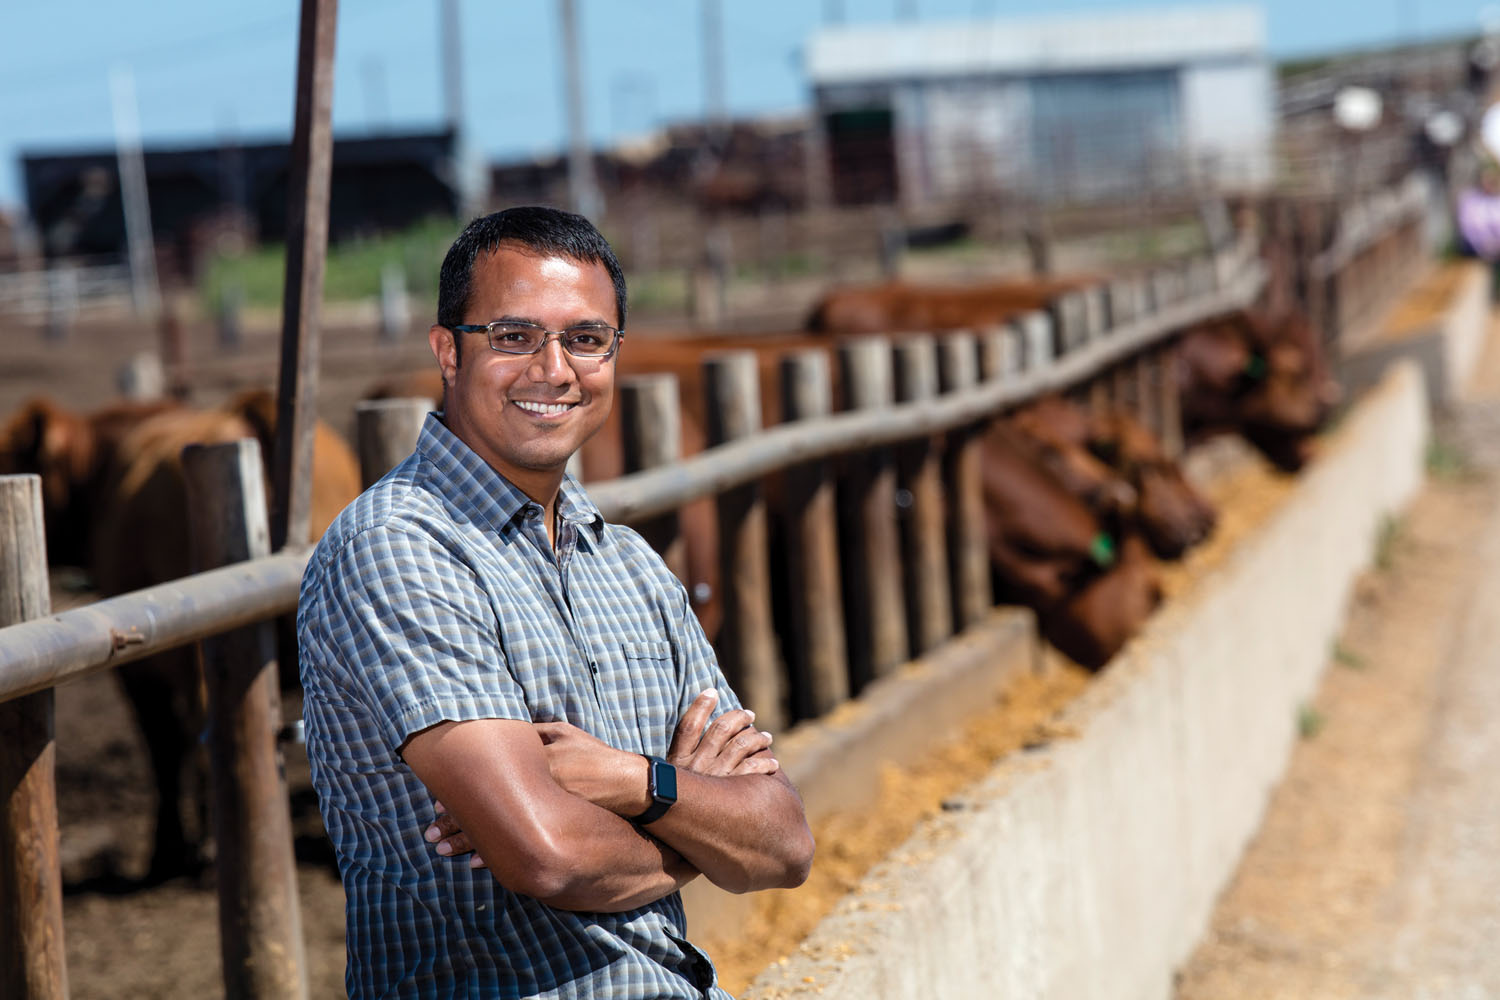 Vishal Singh and his start up company are using telemetric ear tags on cattle to transmit their health back to a central computer. They are testing the tags on cattle at Midwest Feeding Company, Milford, NE. July 31, 2015. Photo by Craig Chandler/University Communications